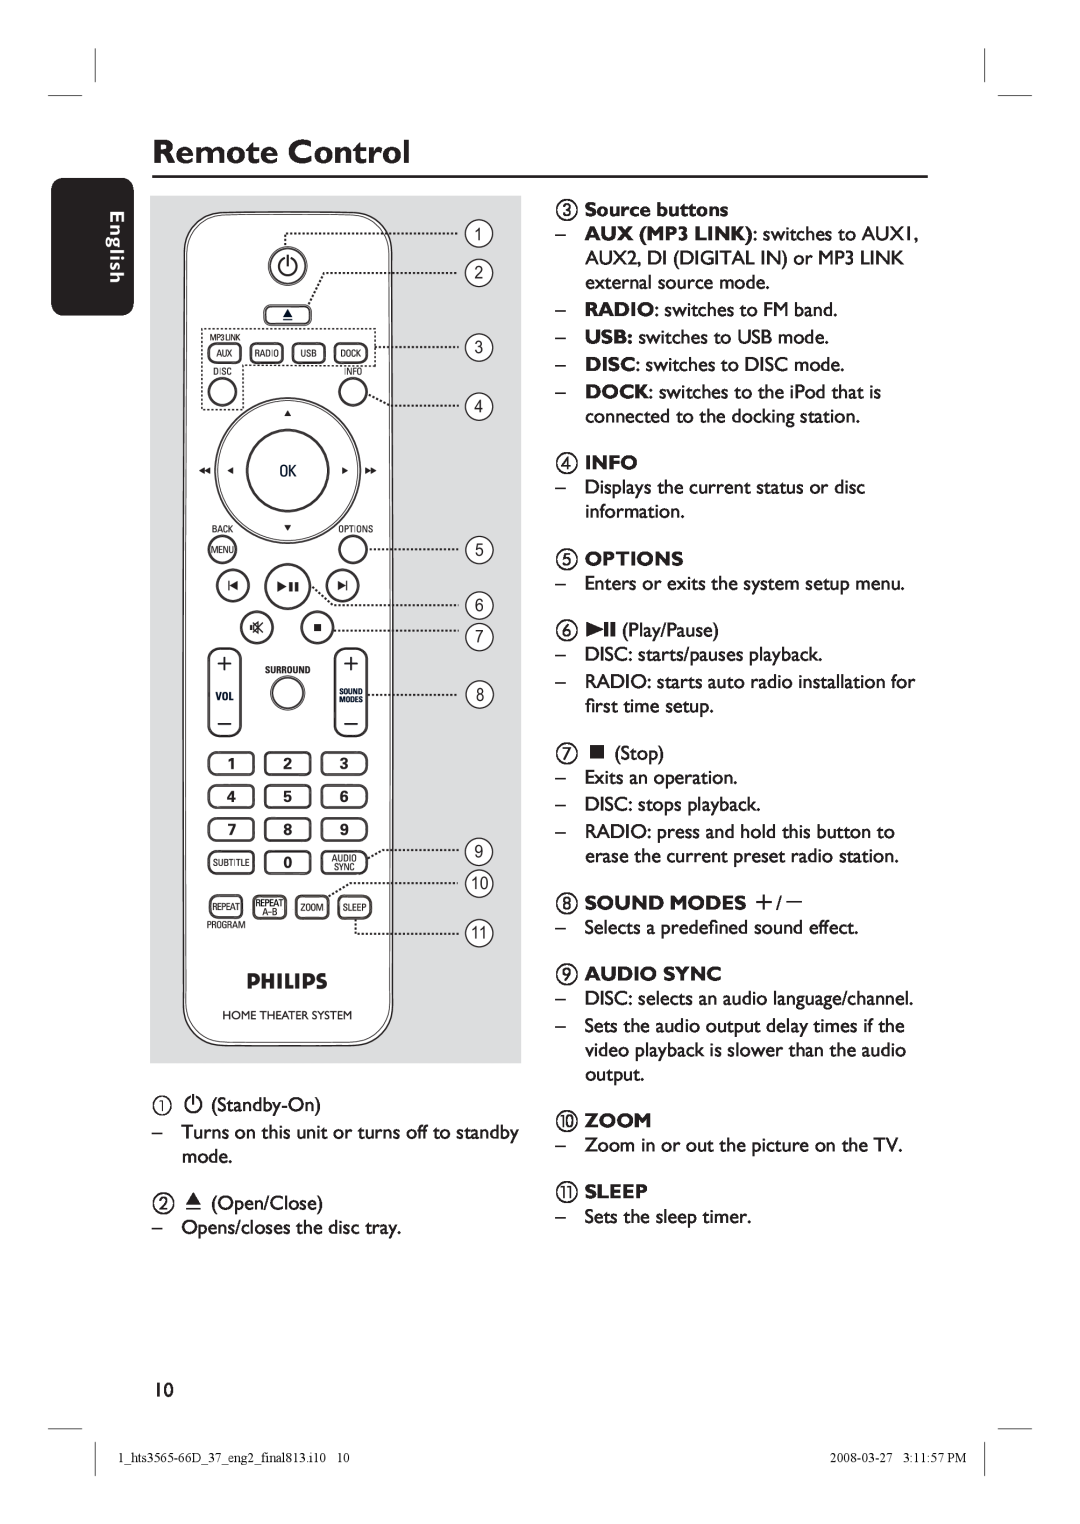 Philips HTS3565D Remote Control, English, c Source buttons, dINFO, eOPTIONS, h SOUND MODES +, i AUDIO SYNC, jZOOM, kSLEEP 